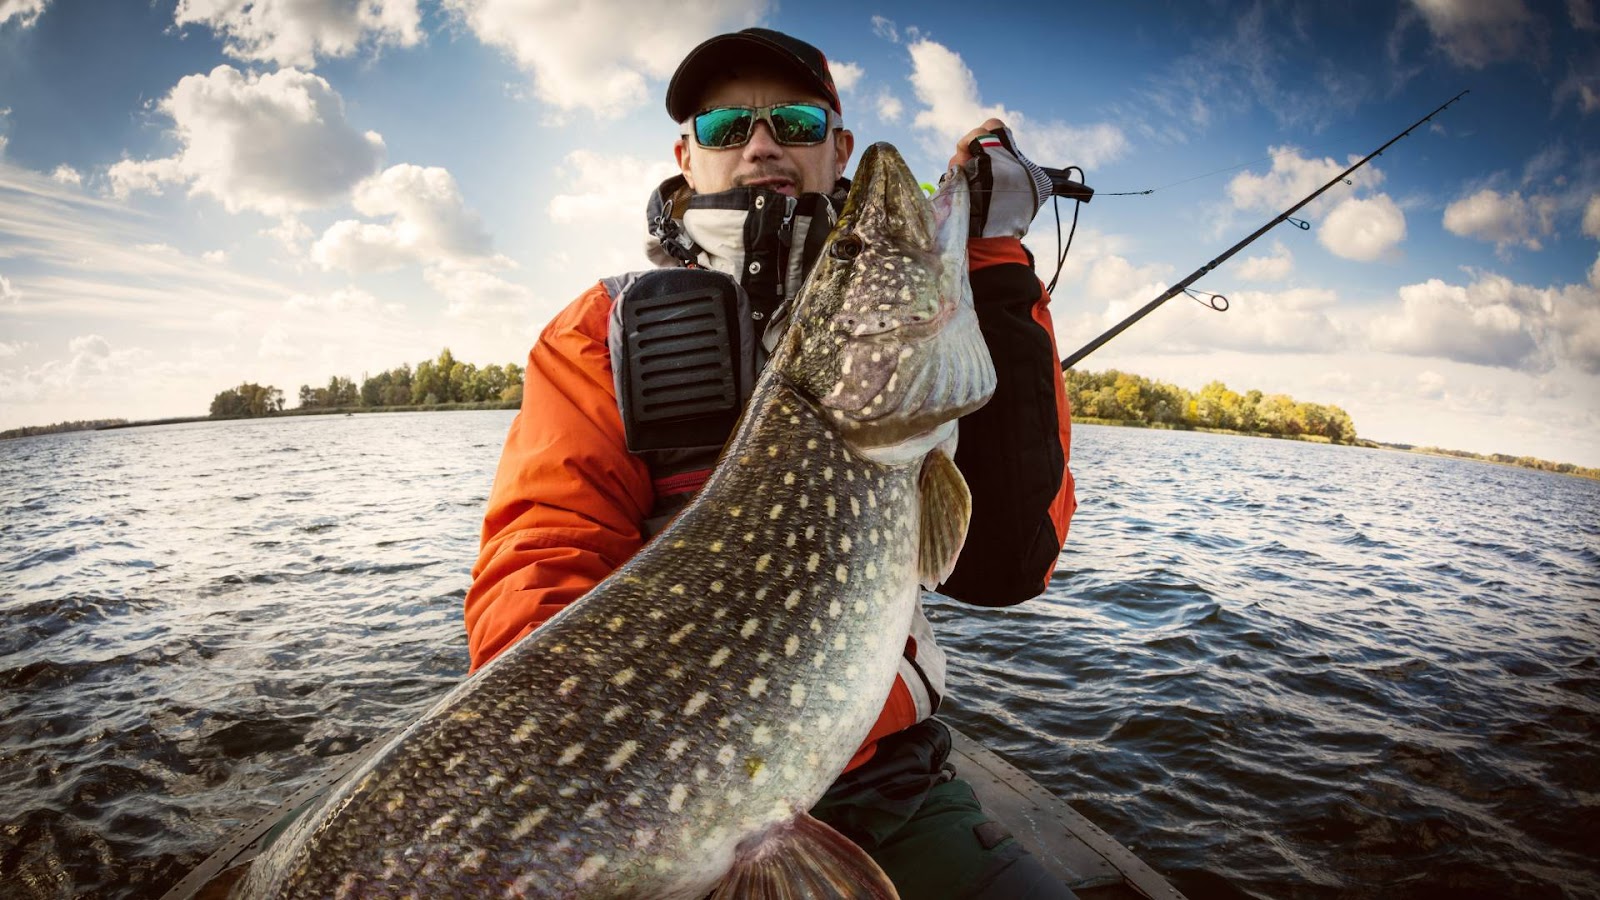 All About Pike Fish - Targeting Trophy Pike Fish